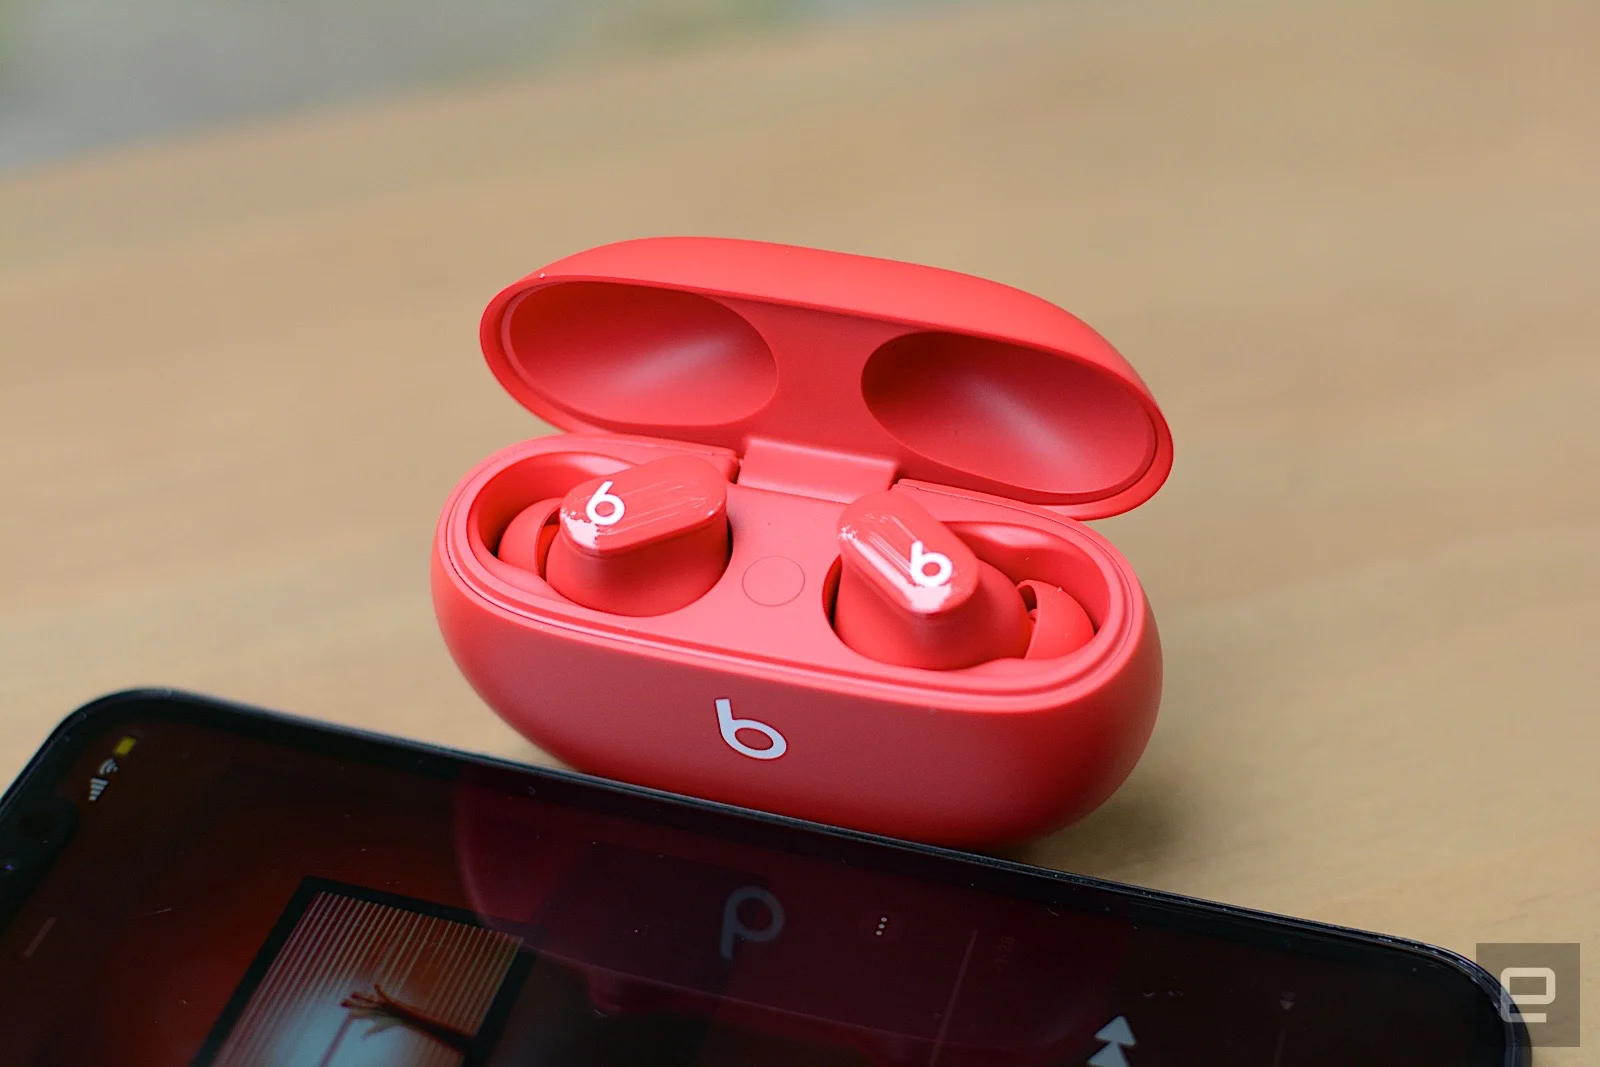 Beats’ latest true wireless earbuds have a design with more universal appeal than its Powerbeats Pro. The company has covered the basics with balanced sound quality, on-board controls, capable ANC and an ambient sound mode. It also added bonuses like support for hands-free Siri and Dolby Atmos in Apple Music. And most importantly, Beats is offering these features for $150.